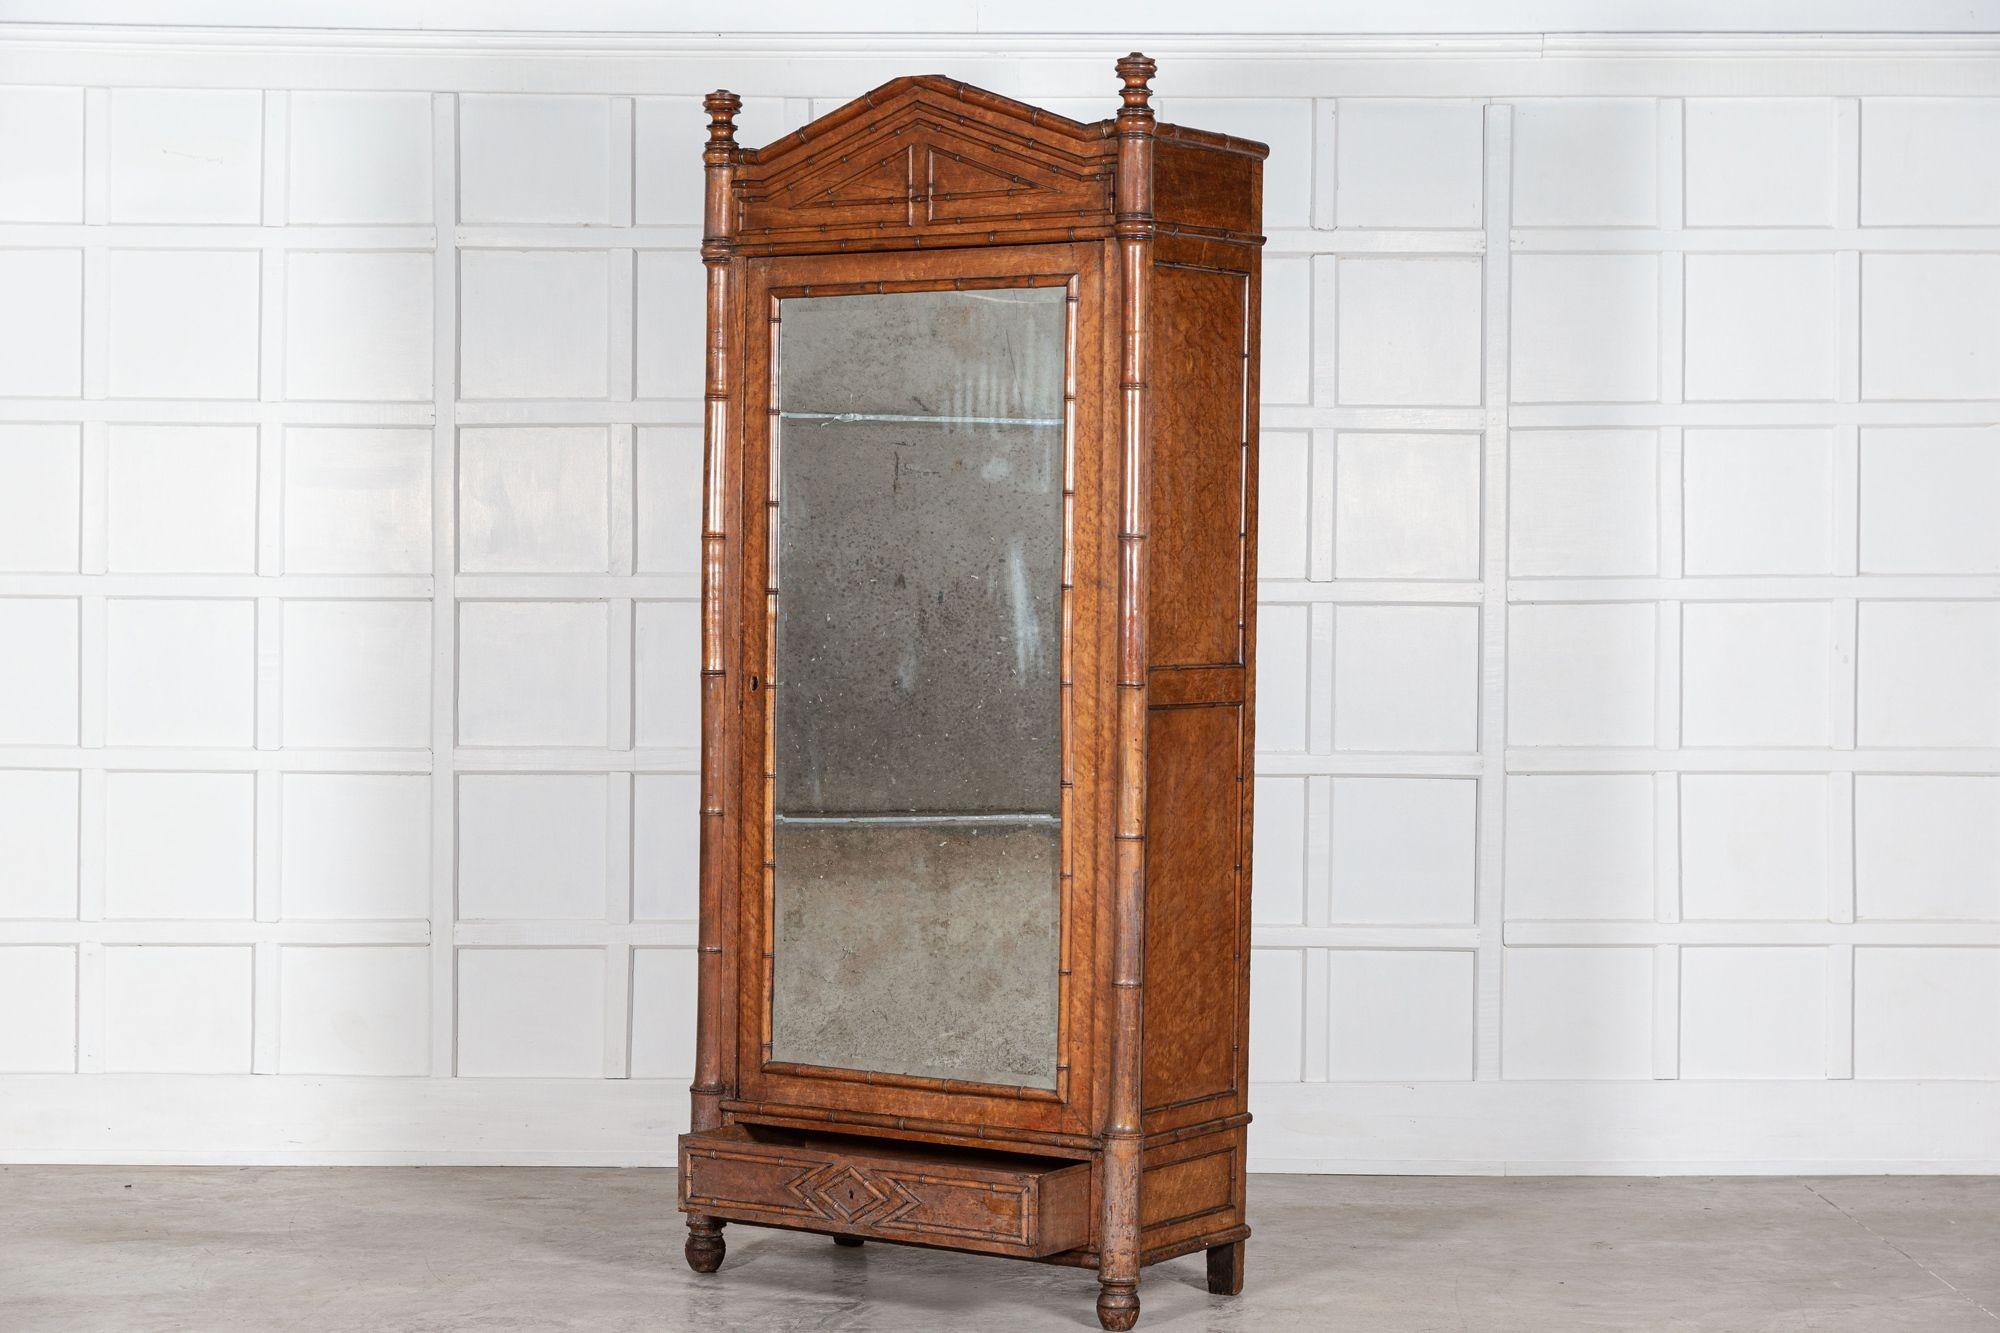 circa 1870
19thC French Faux Bamboo Walnut Mirrored Armoire
We can also customise existing pieces to suit your scheme/requirements. We have our own workshop, restorers and finishers. From adapting to finishing pieces including, stripping,